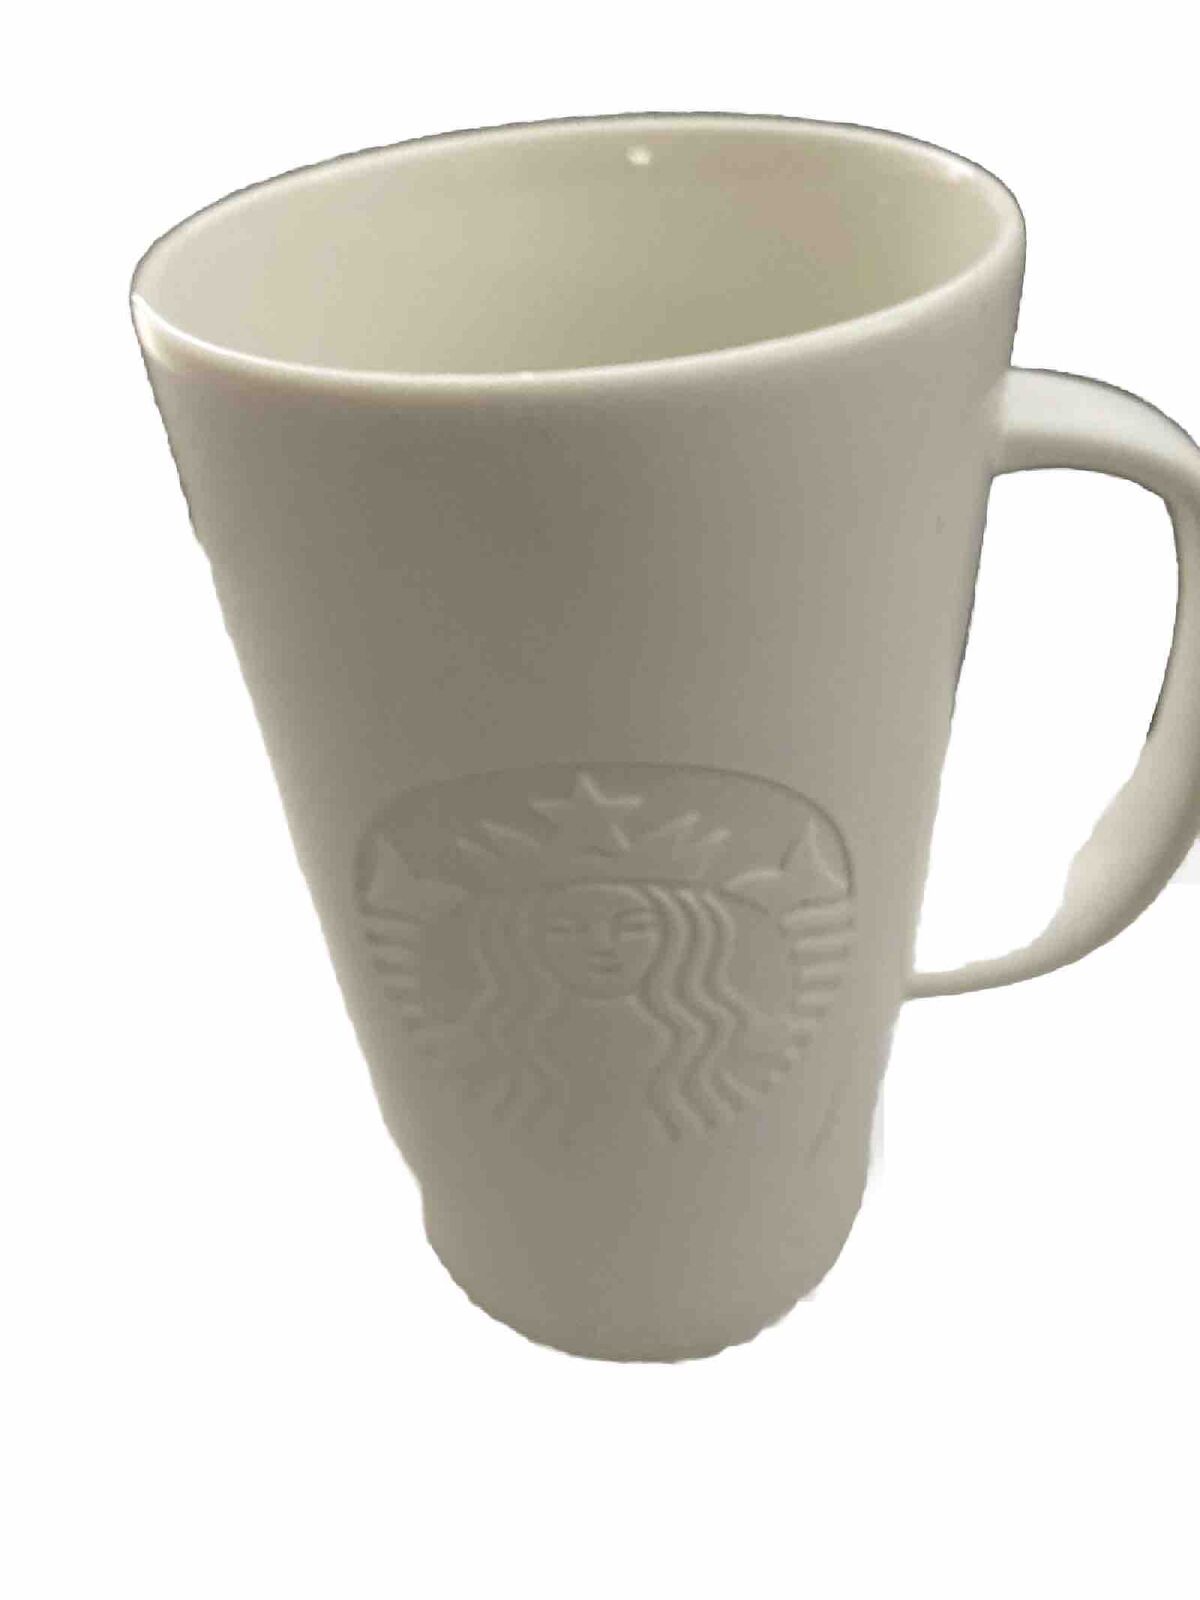 2014 Starbucks - Off-White Etched Mermaid Collector Coffee Mug 12 Ounces